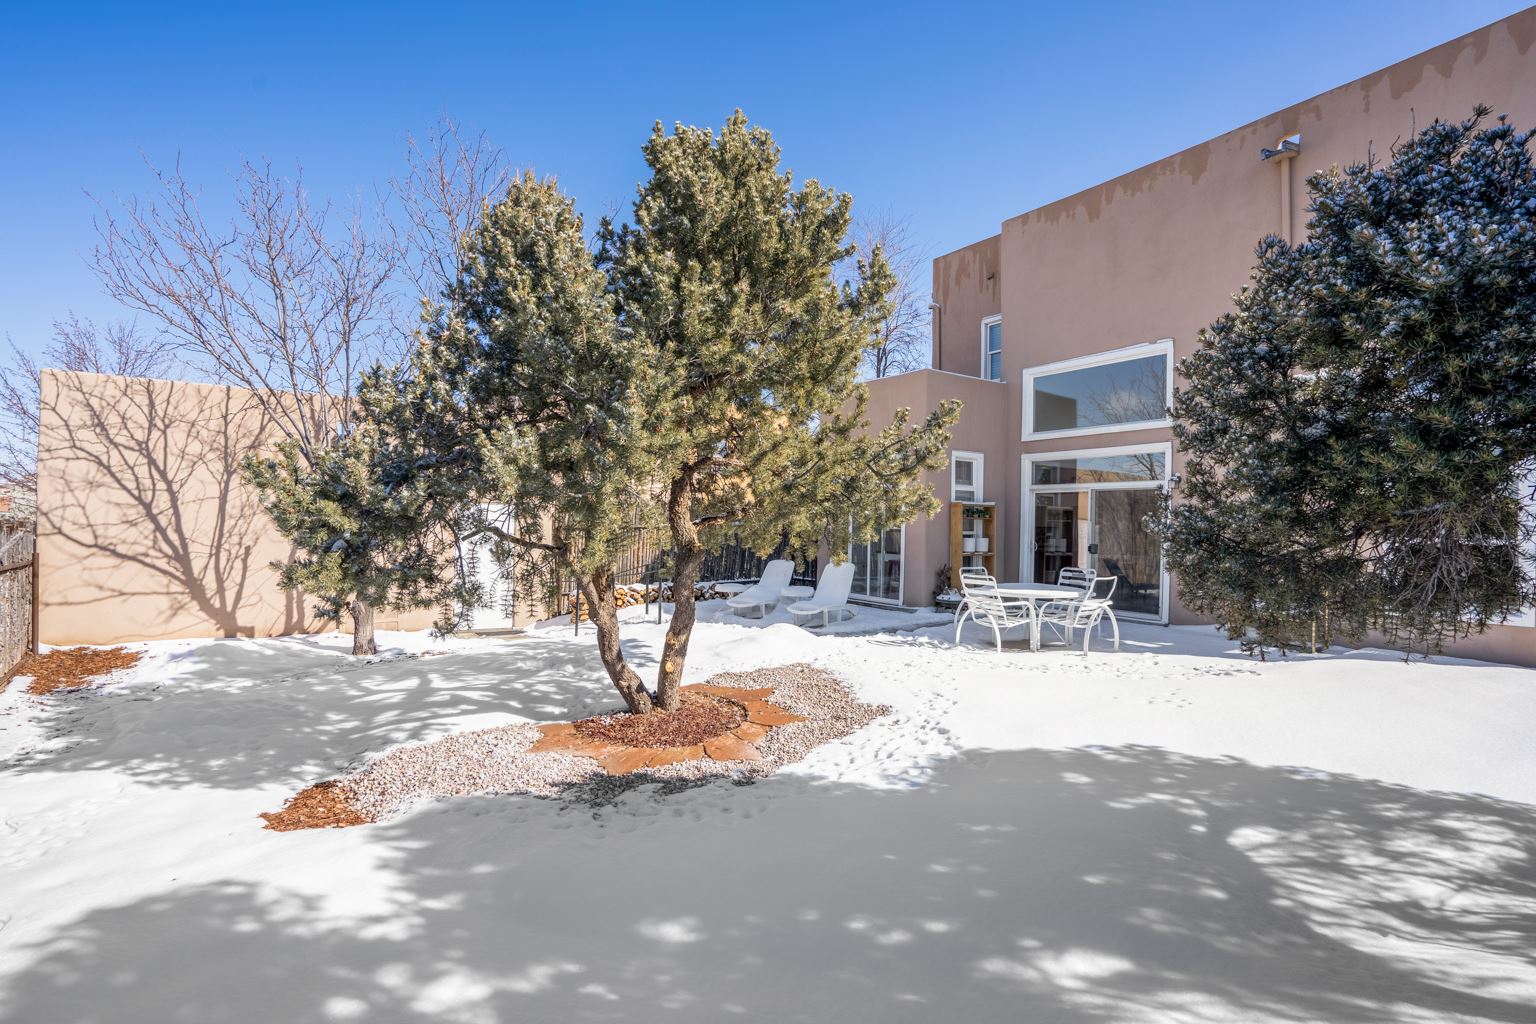 4436 Autumn Leaf, Santa Fe, New Mexico 87507, 3 Bedrooms Bedrooms, ,2 BathroomsBathrooms,Residential,For Sale,4436 Autumn Leaf,202100614